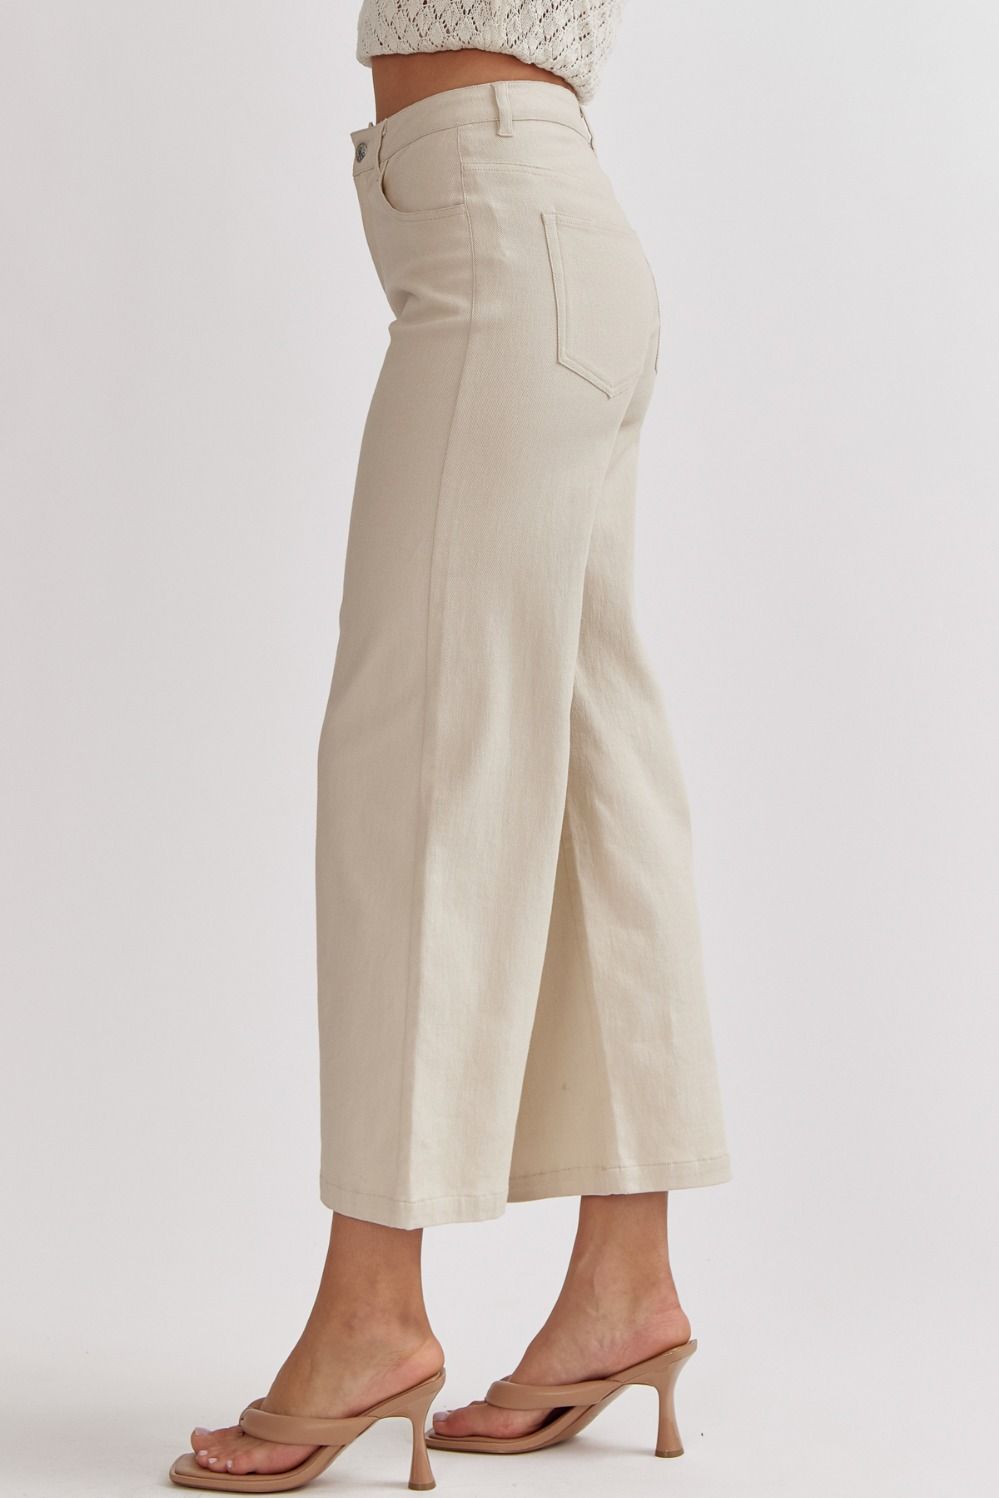 acid wash high waisted wide leg pants in sand-side view